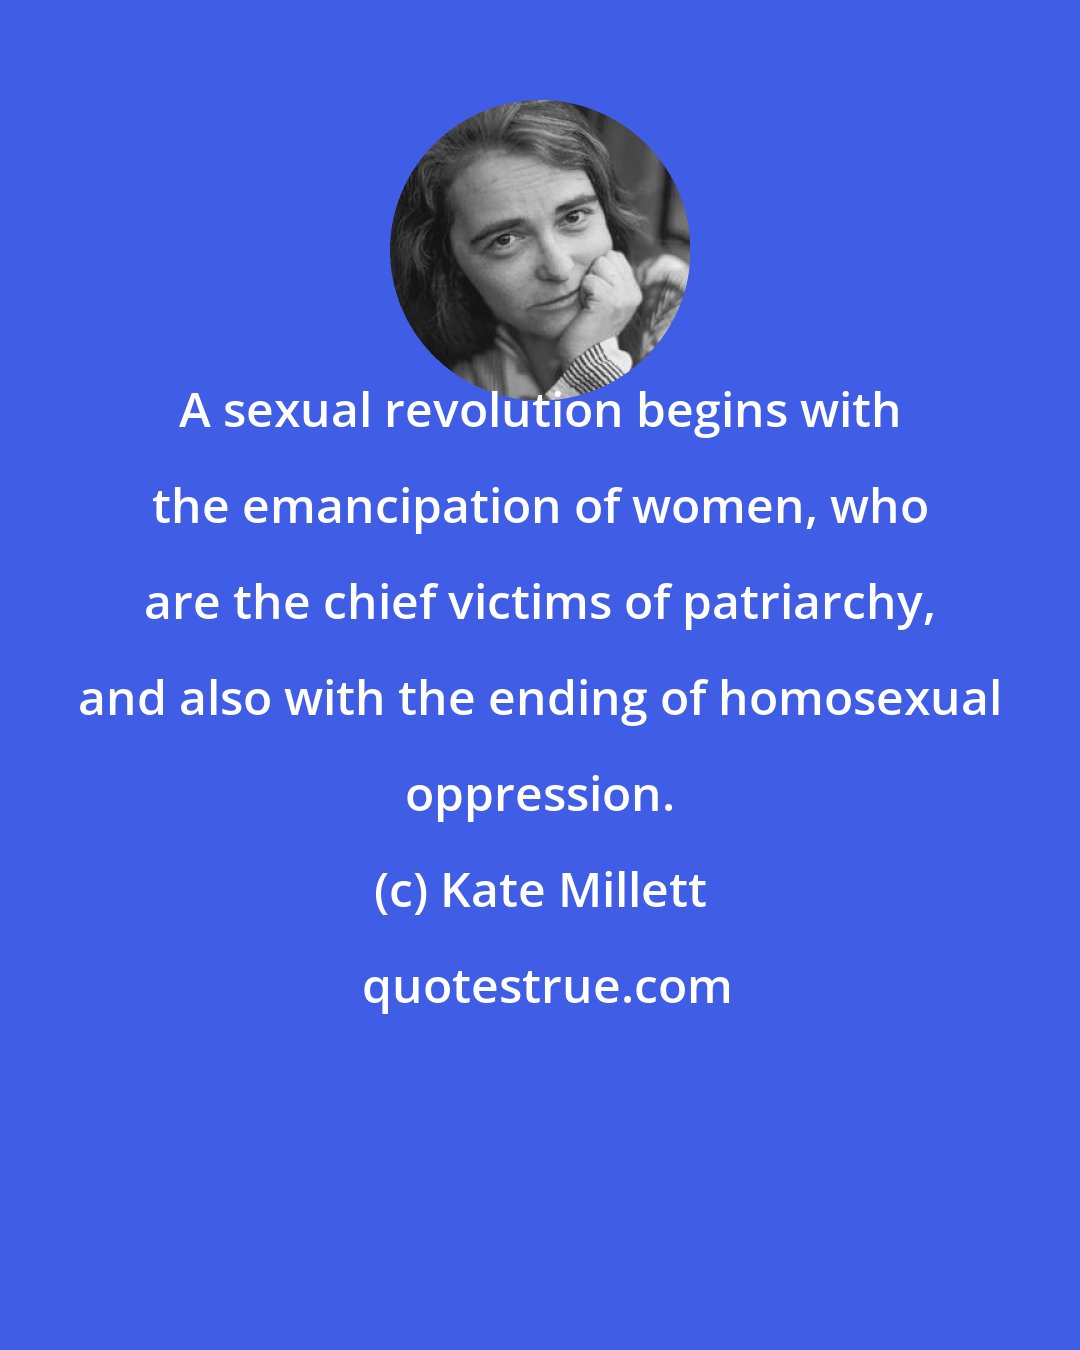 Kate Millett: A sexual revolution begins with the emancipation of women, who are the chief victims of patriarchy, and also with the ending of homosexual oppression.